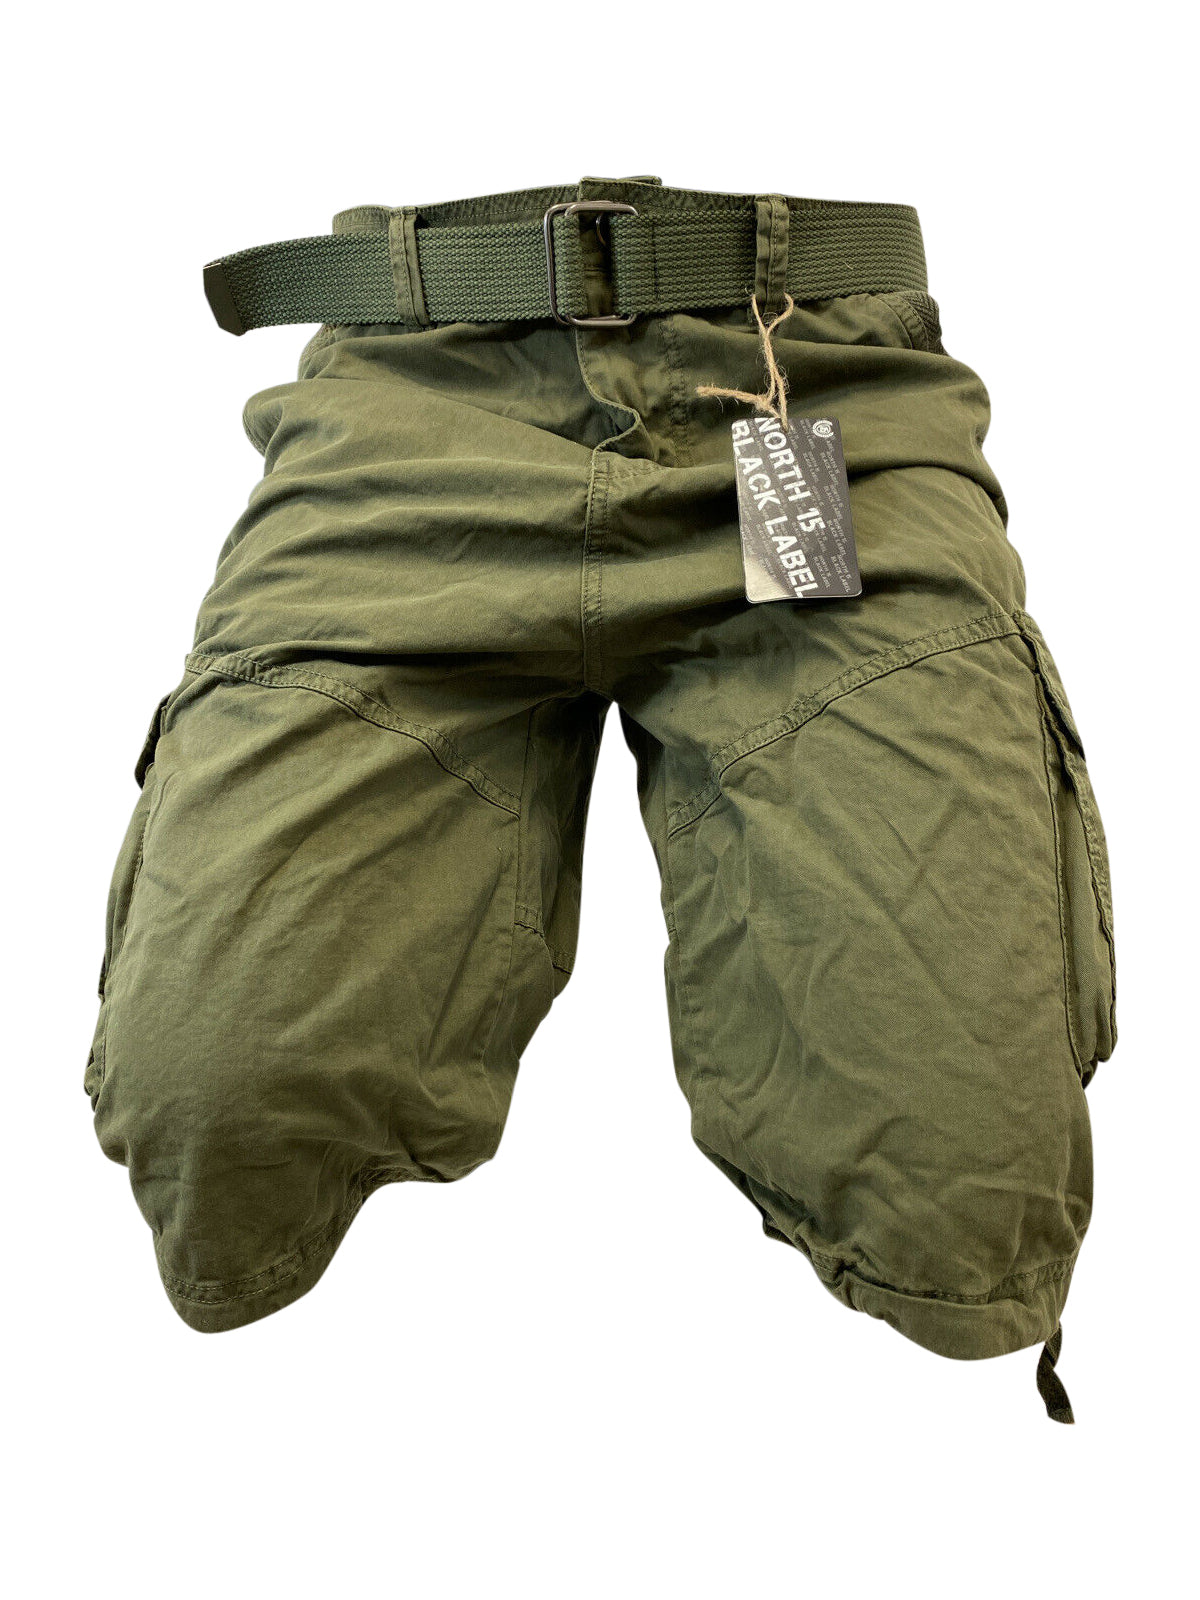 Mens Army Green Cargo Shorts with Adjustable Belt